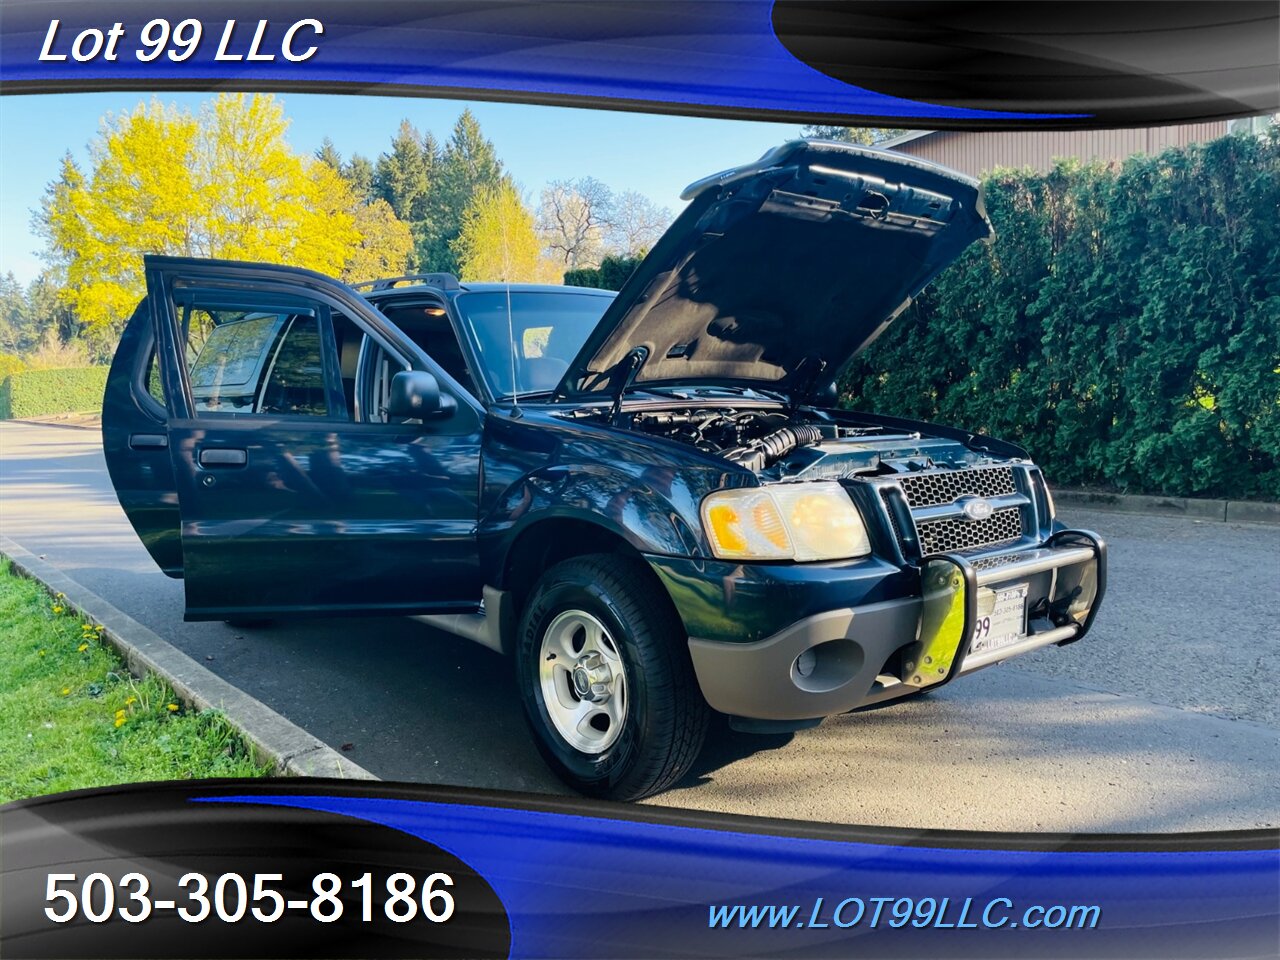 2003 Ford Explorer Sport Trac XLS 4x4  1-OWNER 117k  NEW TIRES  Canopy   - Photo 42 - Milwaukie, OR 97267